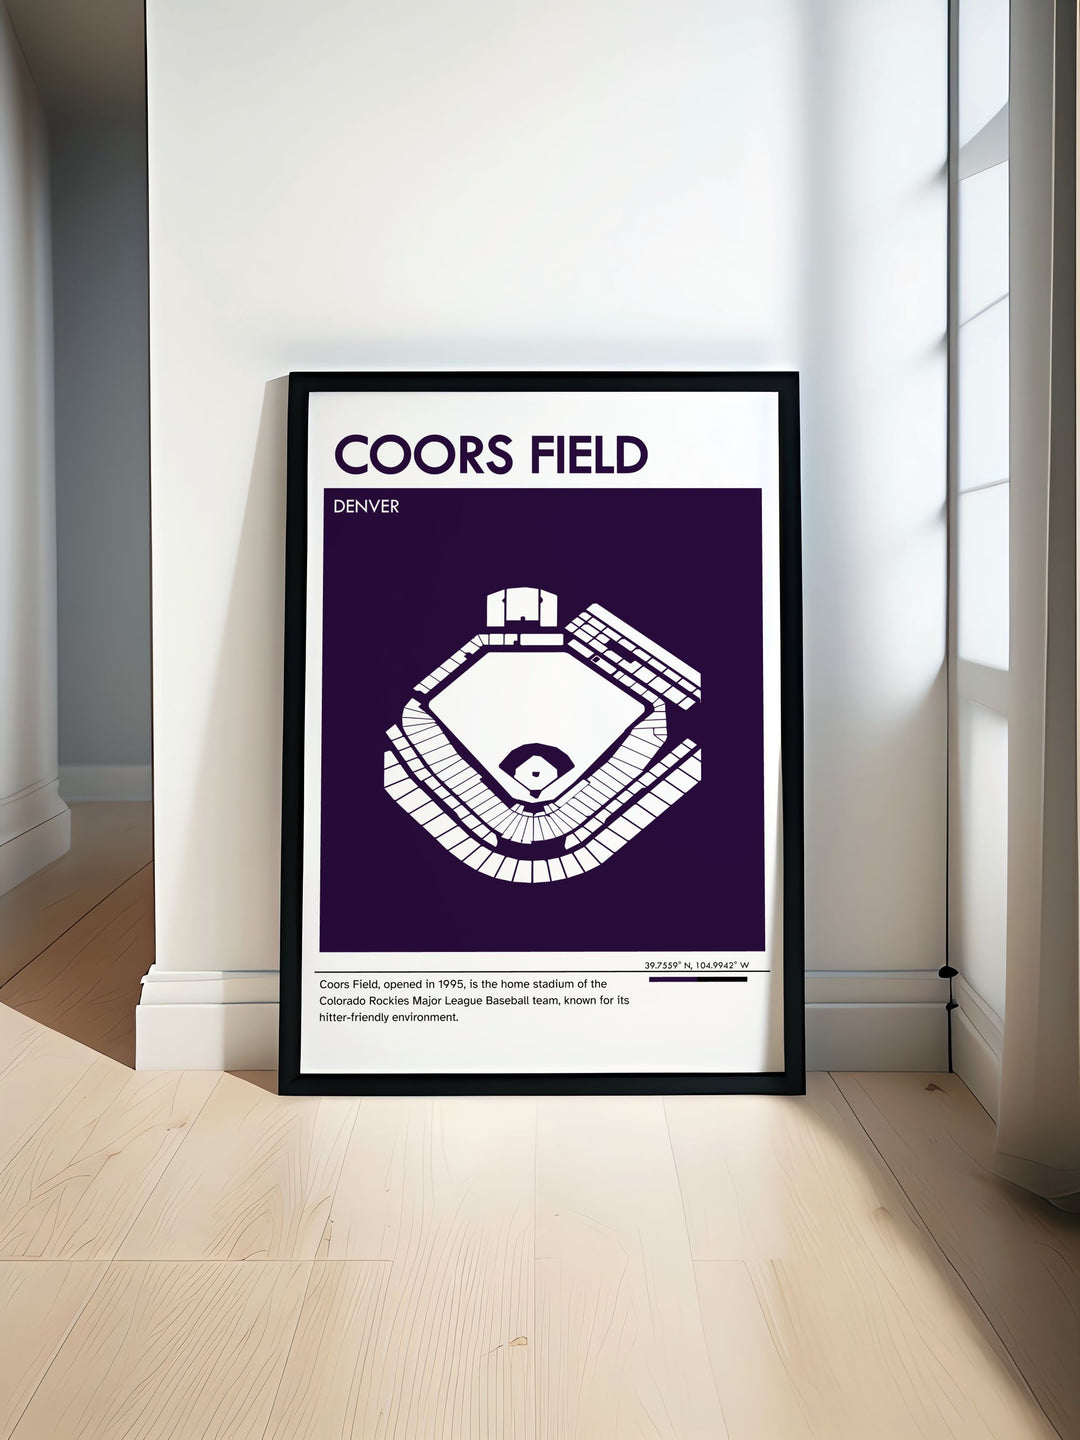 A beautifully detailed travel poster of COORS FIELD showcasing the excitement and architectural beauty of the Colorado Rockies stadium perfect for Rockies fans and MLB lovers who want to bring the spirit of COORS FIELD into their home decor